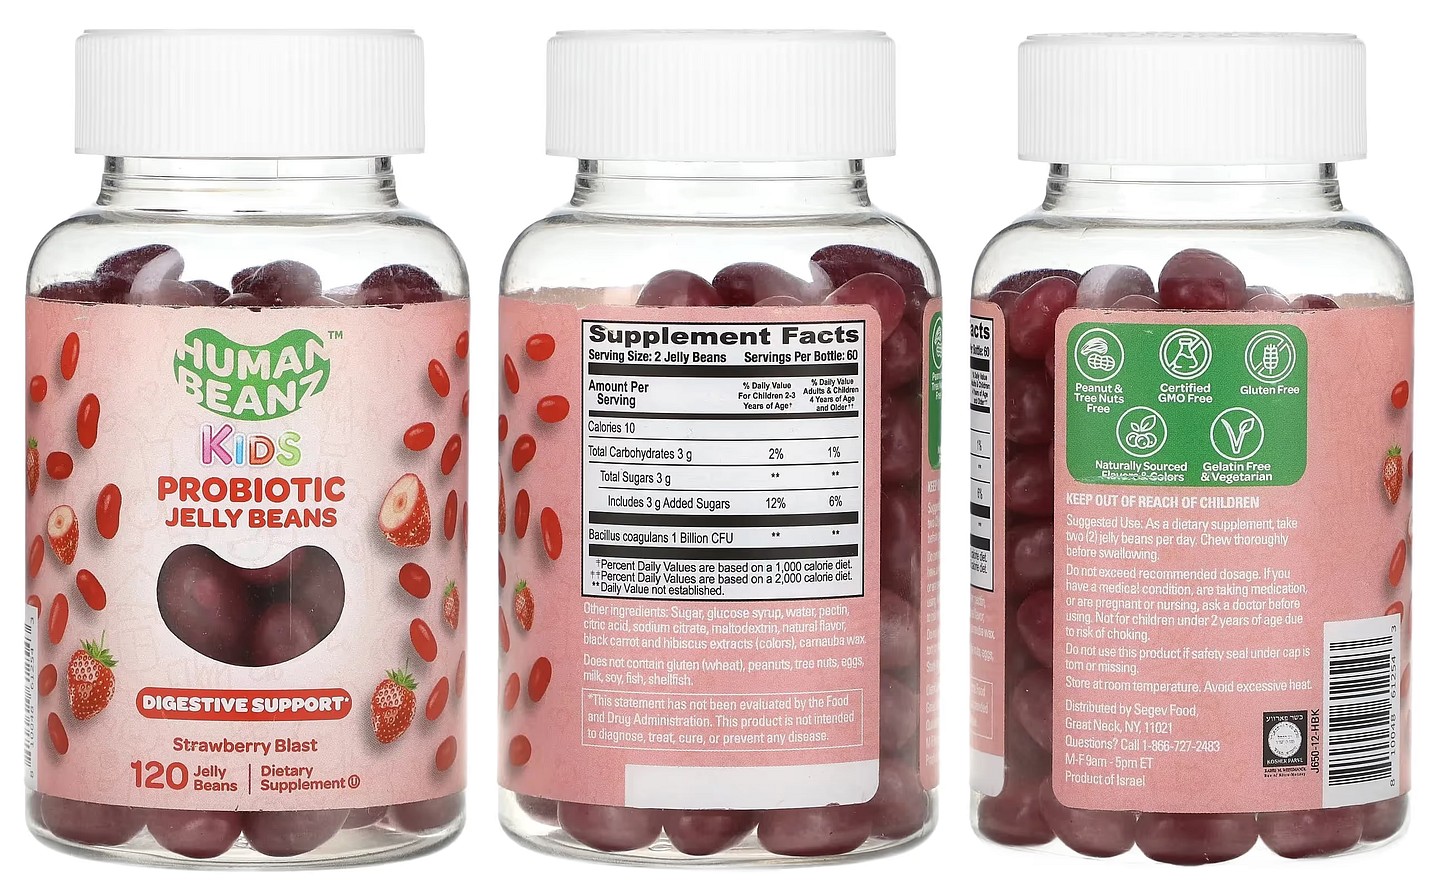 Human Beanz, Kids Probiotic Jelly Beans Strawberry Blast packaging